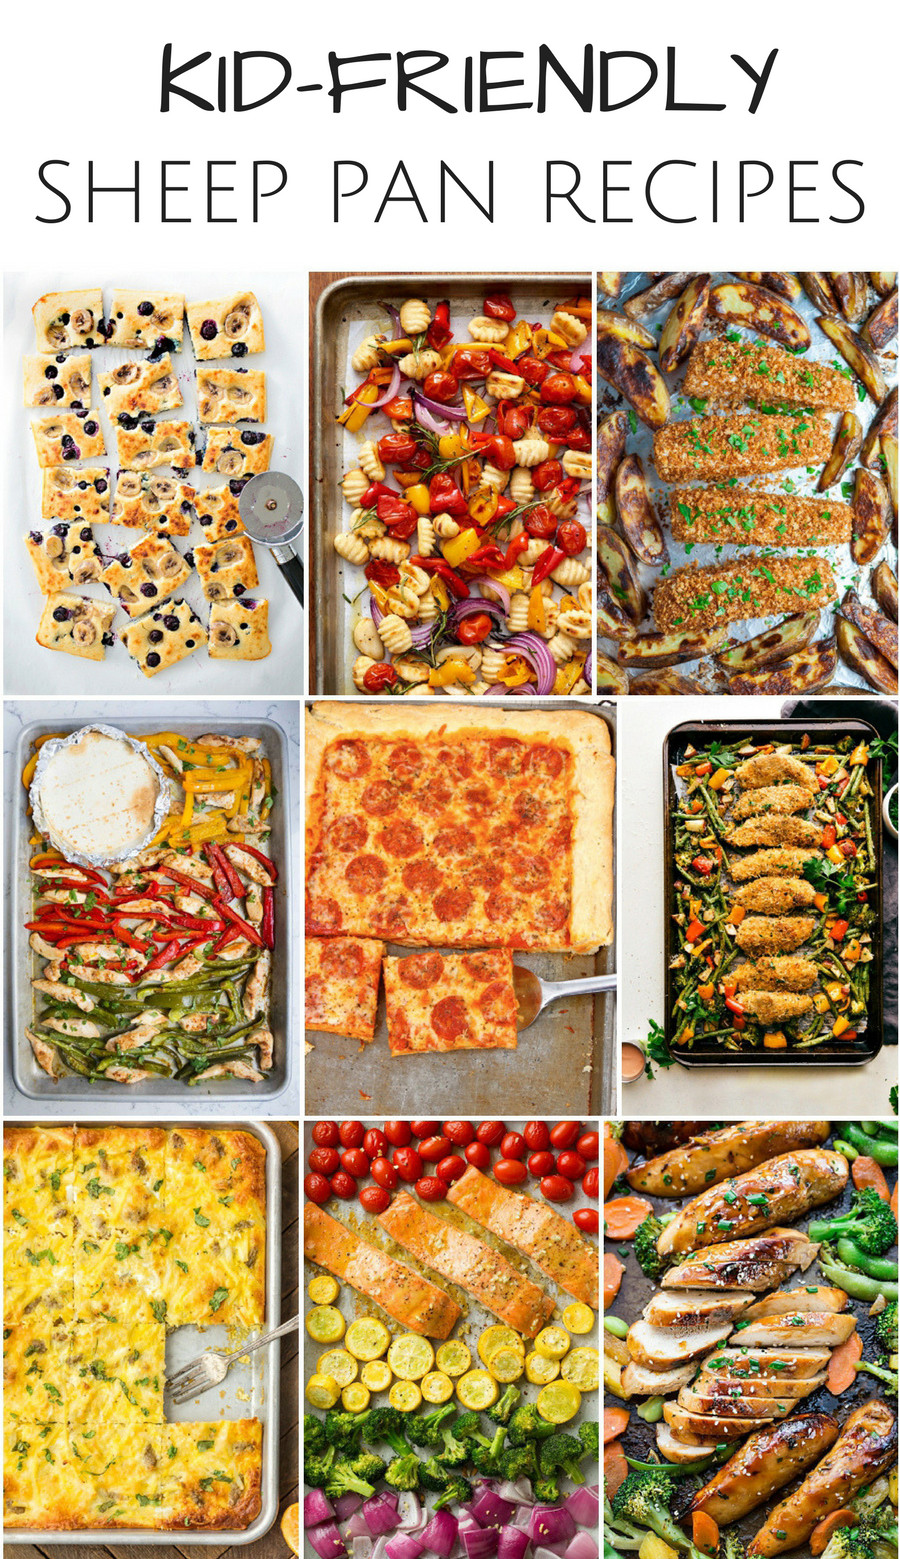 Easy Weeknight Dinners Kid Friendly
 10 DELICIOUS SHEET PAN RECIPES KIDS WILL LOVE